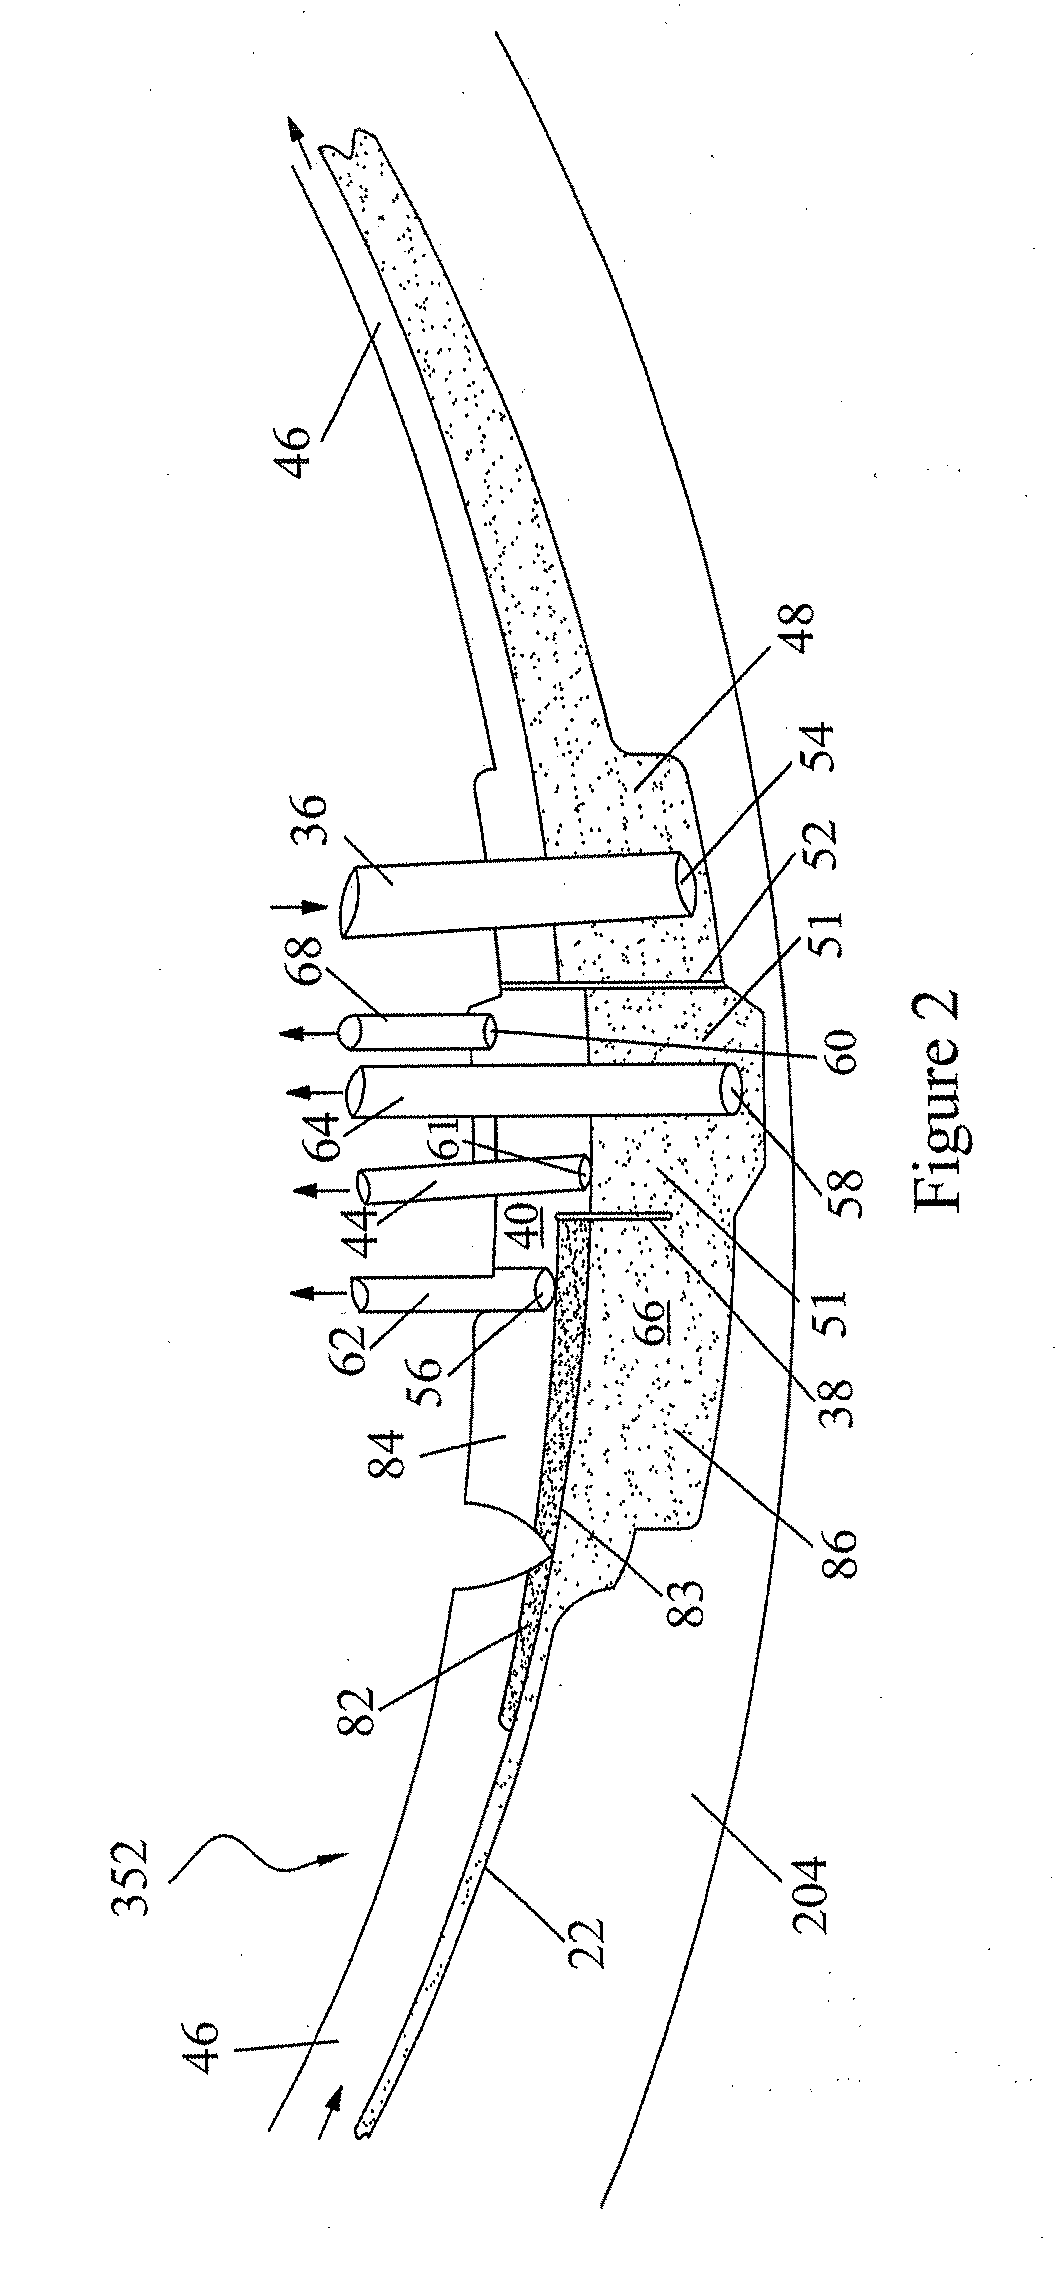 Method and Apparatus for Leukoreduction of Red Blood Cells